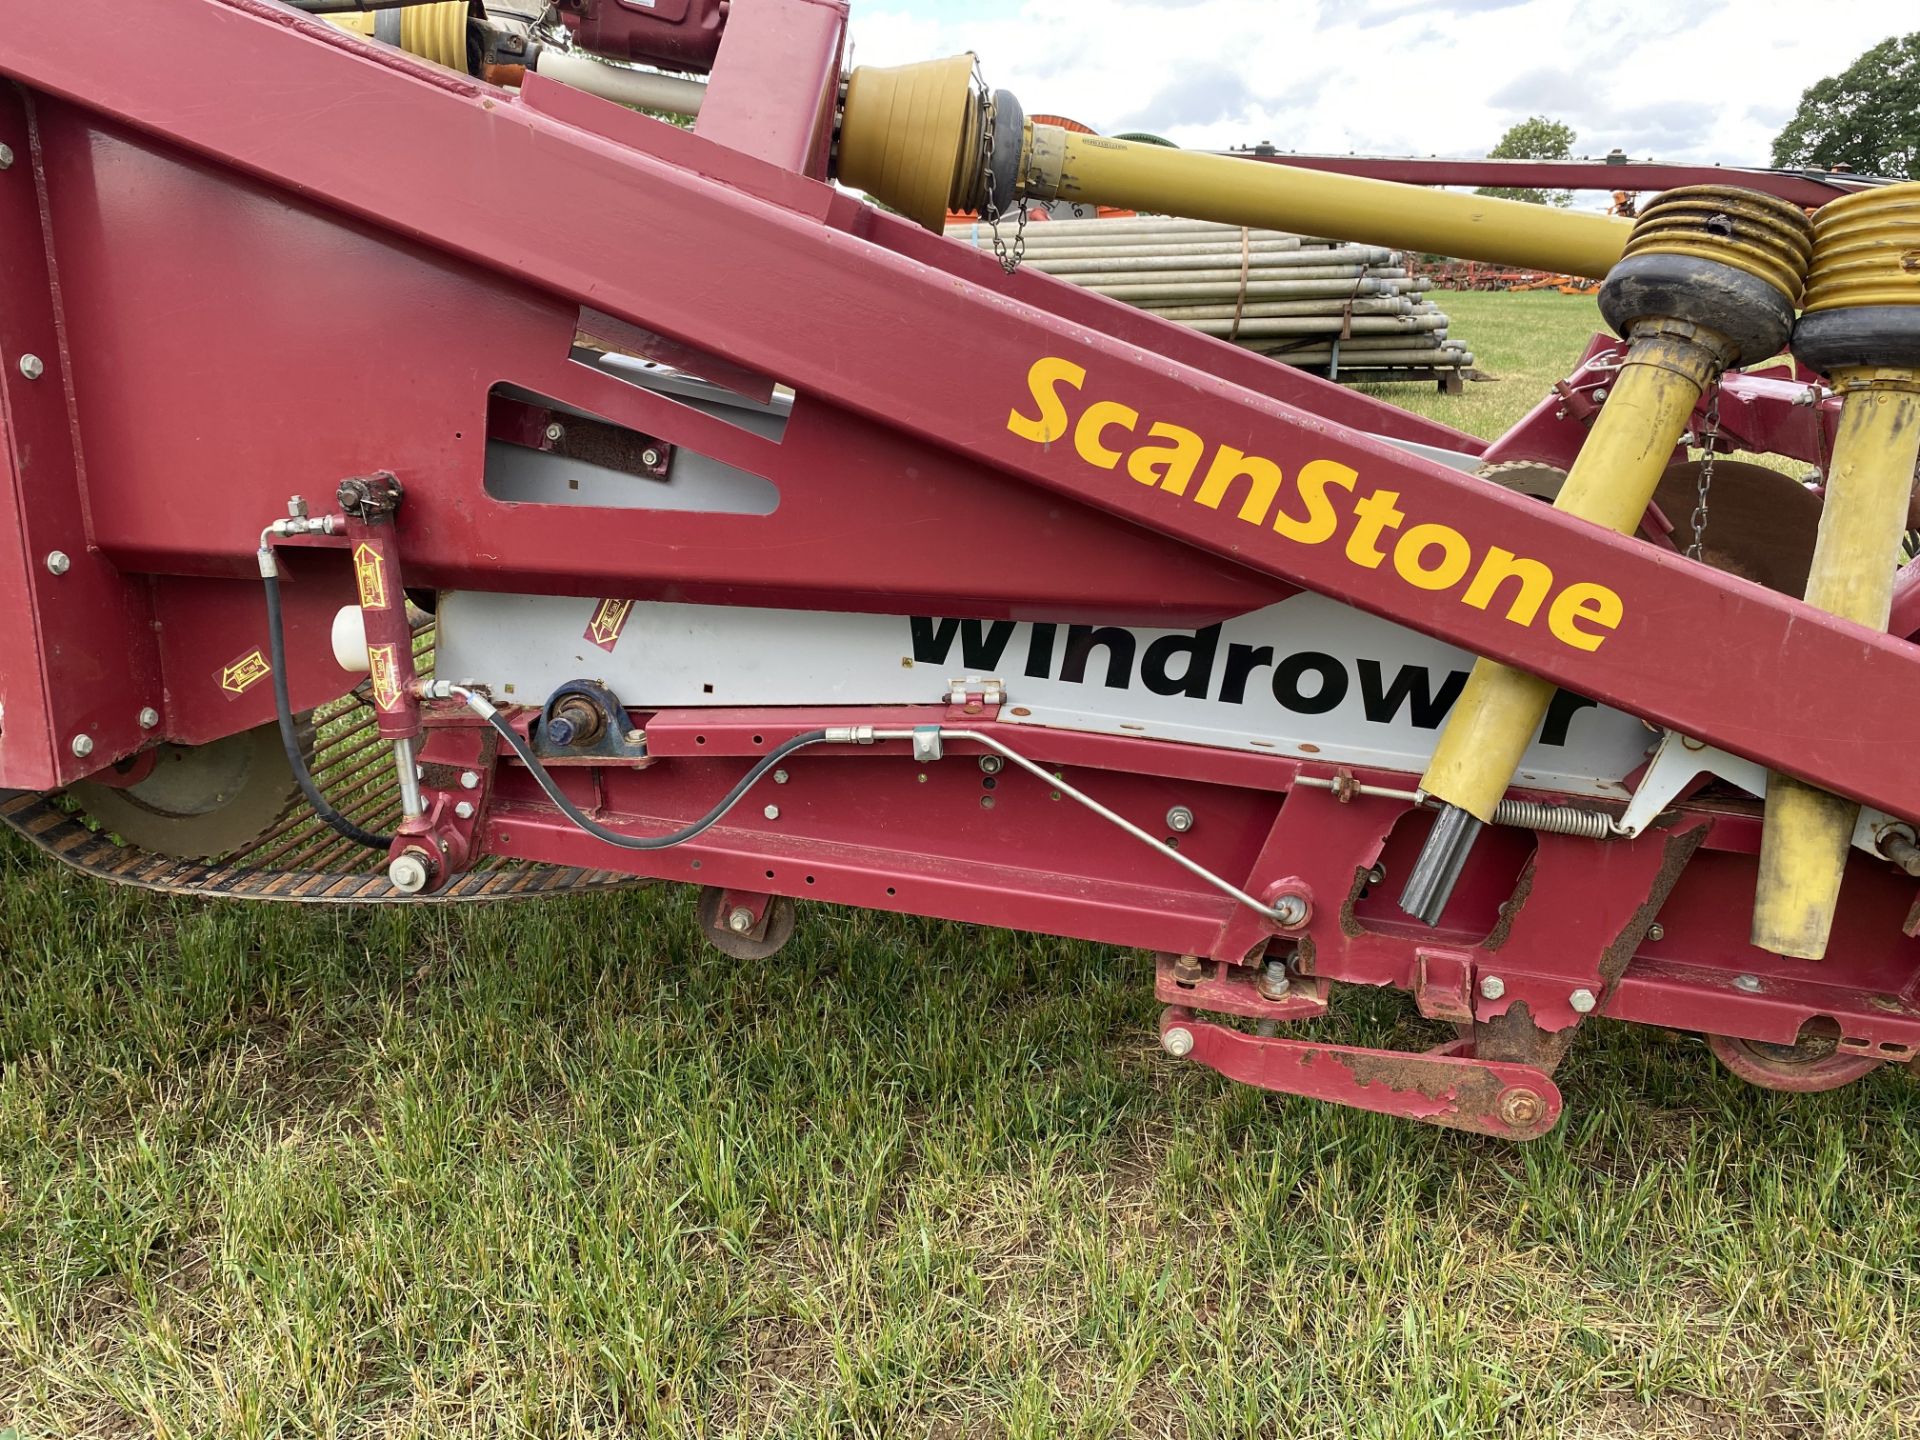 Scanstone trailed Windrower. Model WD17-2+5. 2014. Serial number 2030. Set for 72" beds. LM - Image 20 of 29